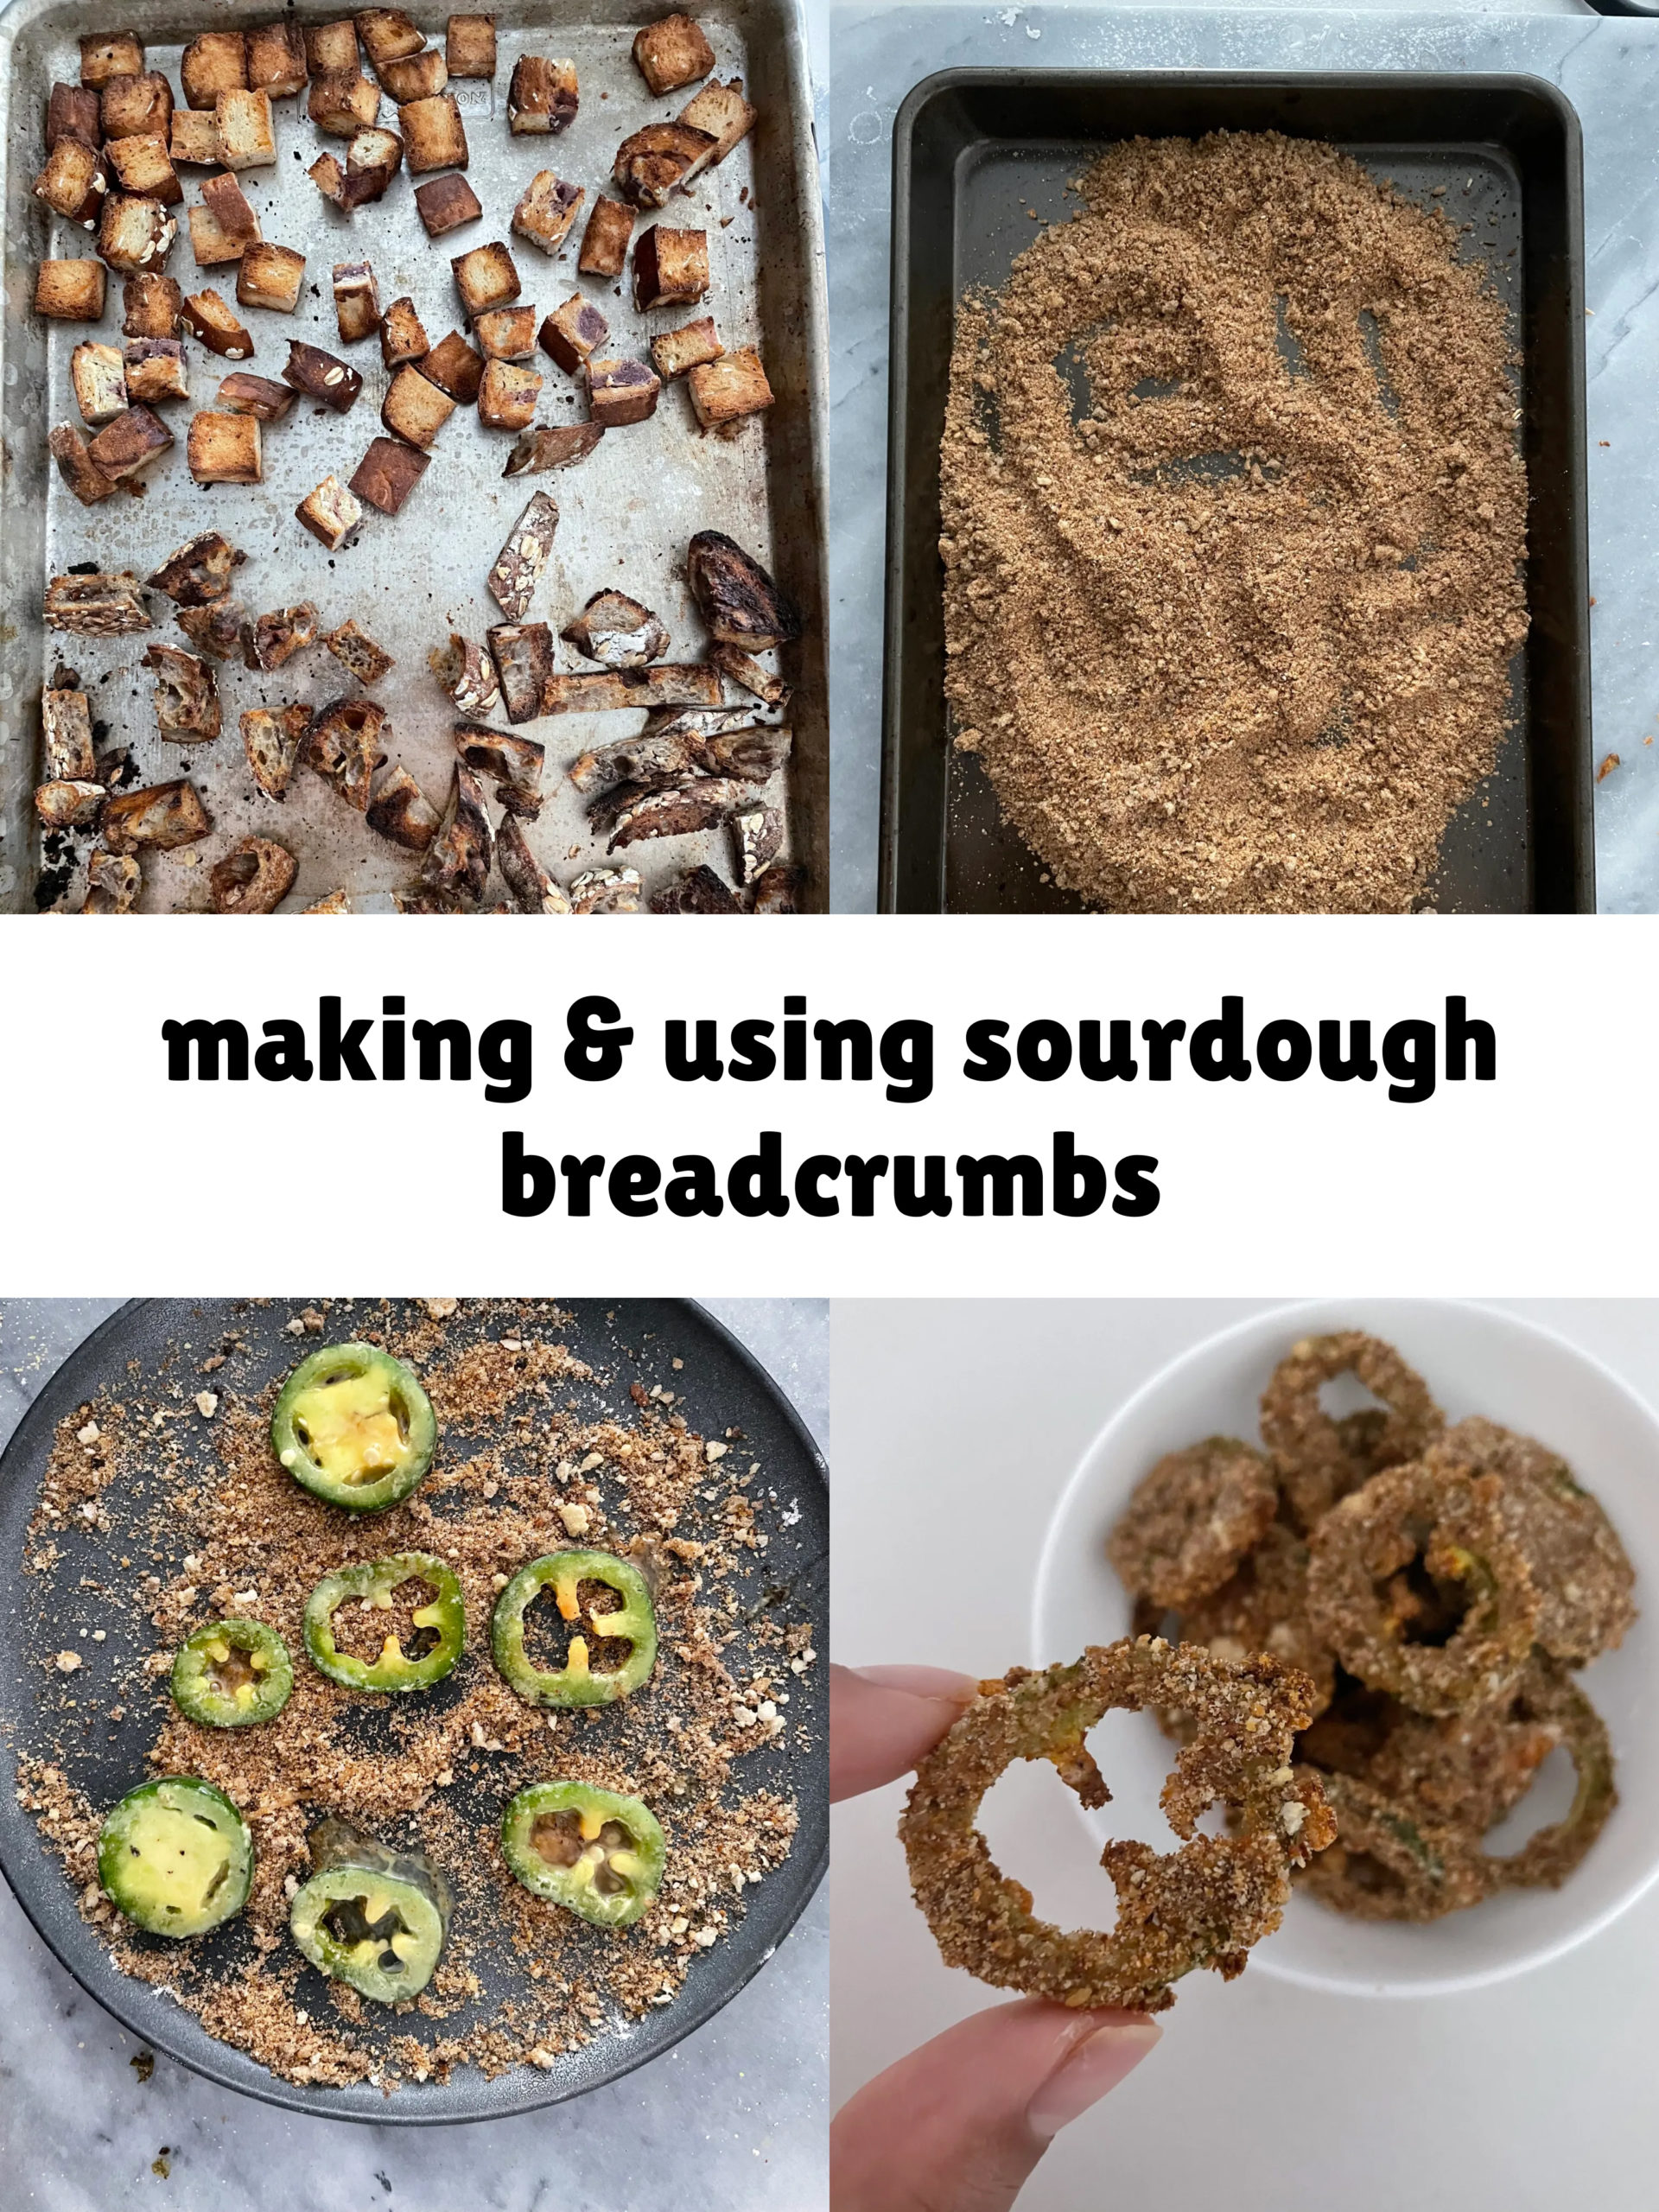 Making and using sourdough breadcrumbs